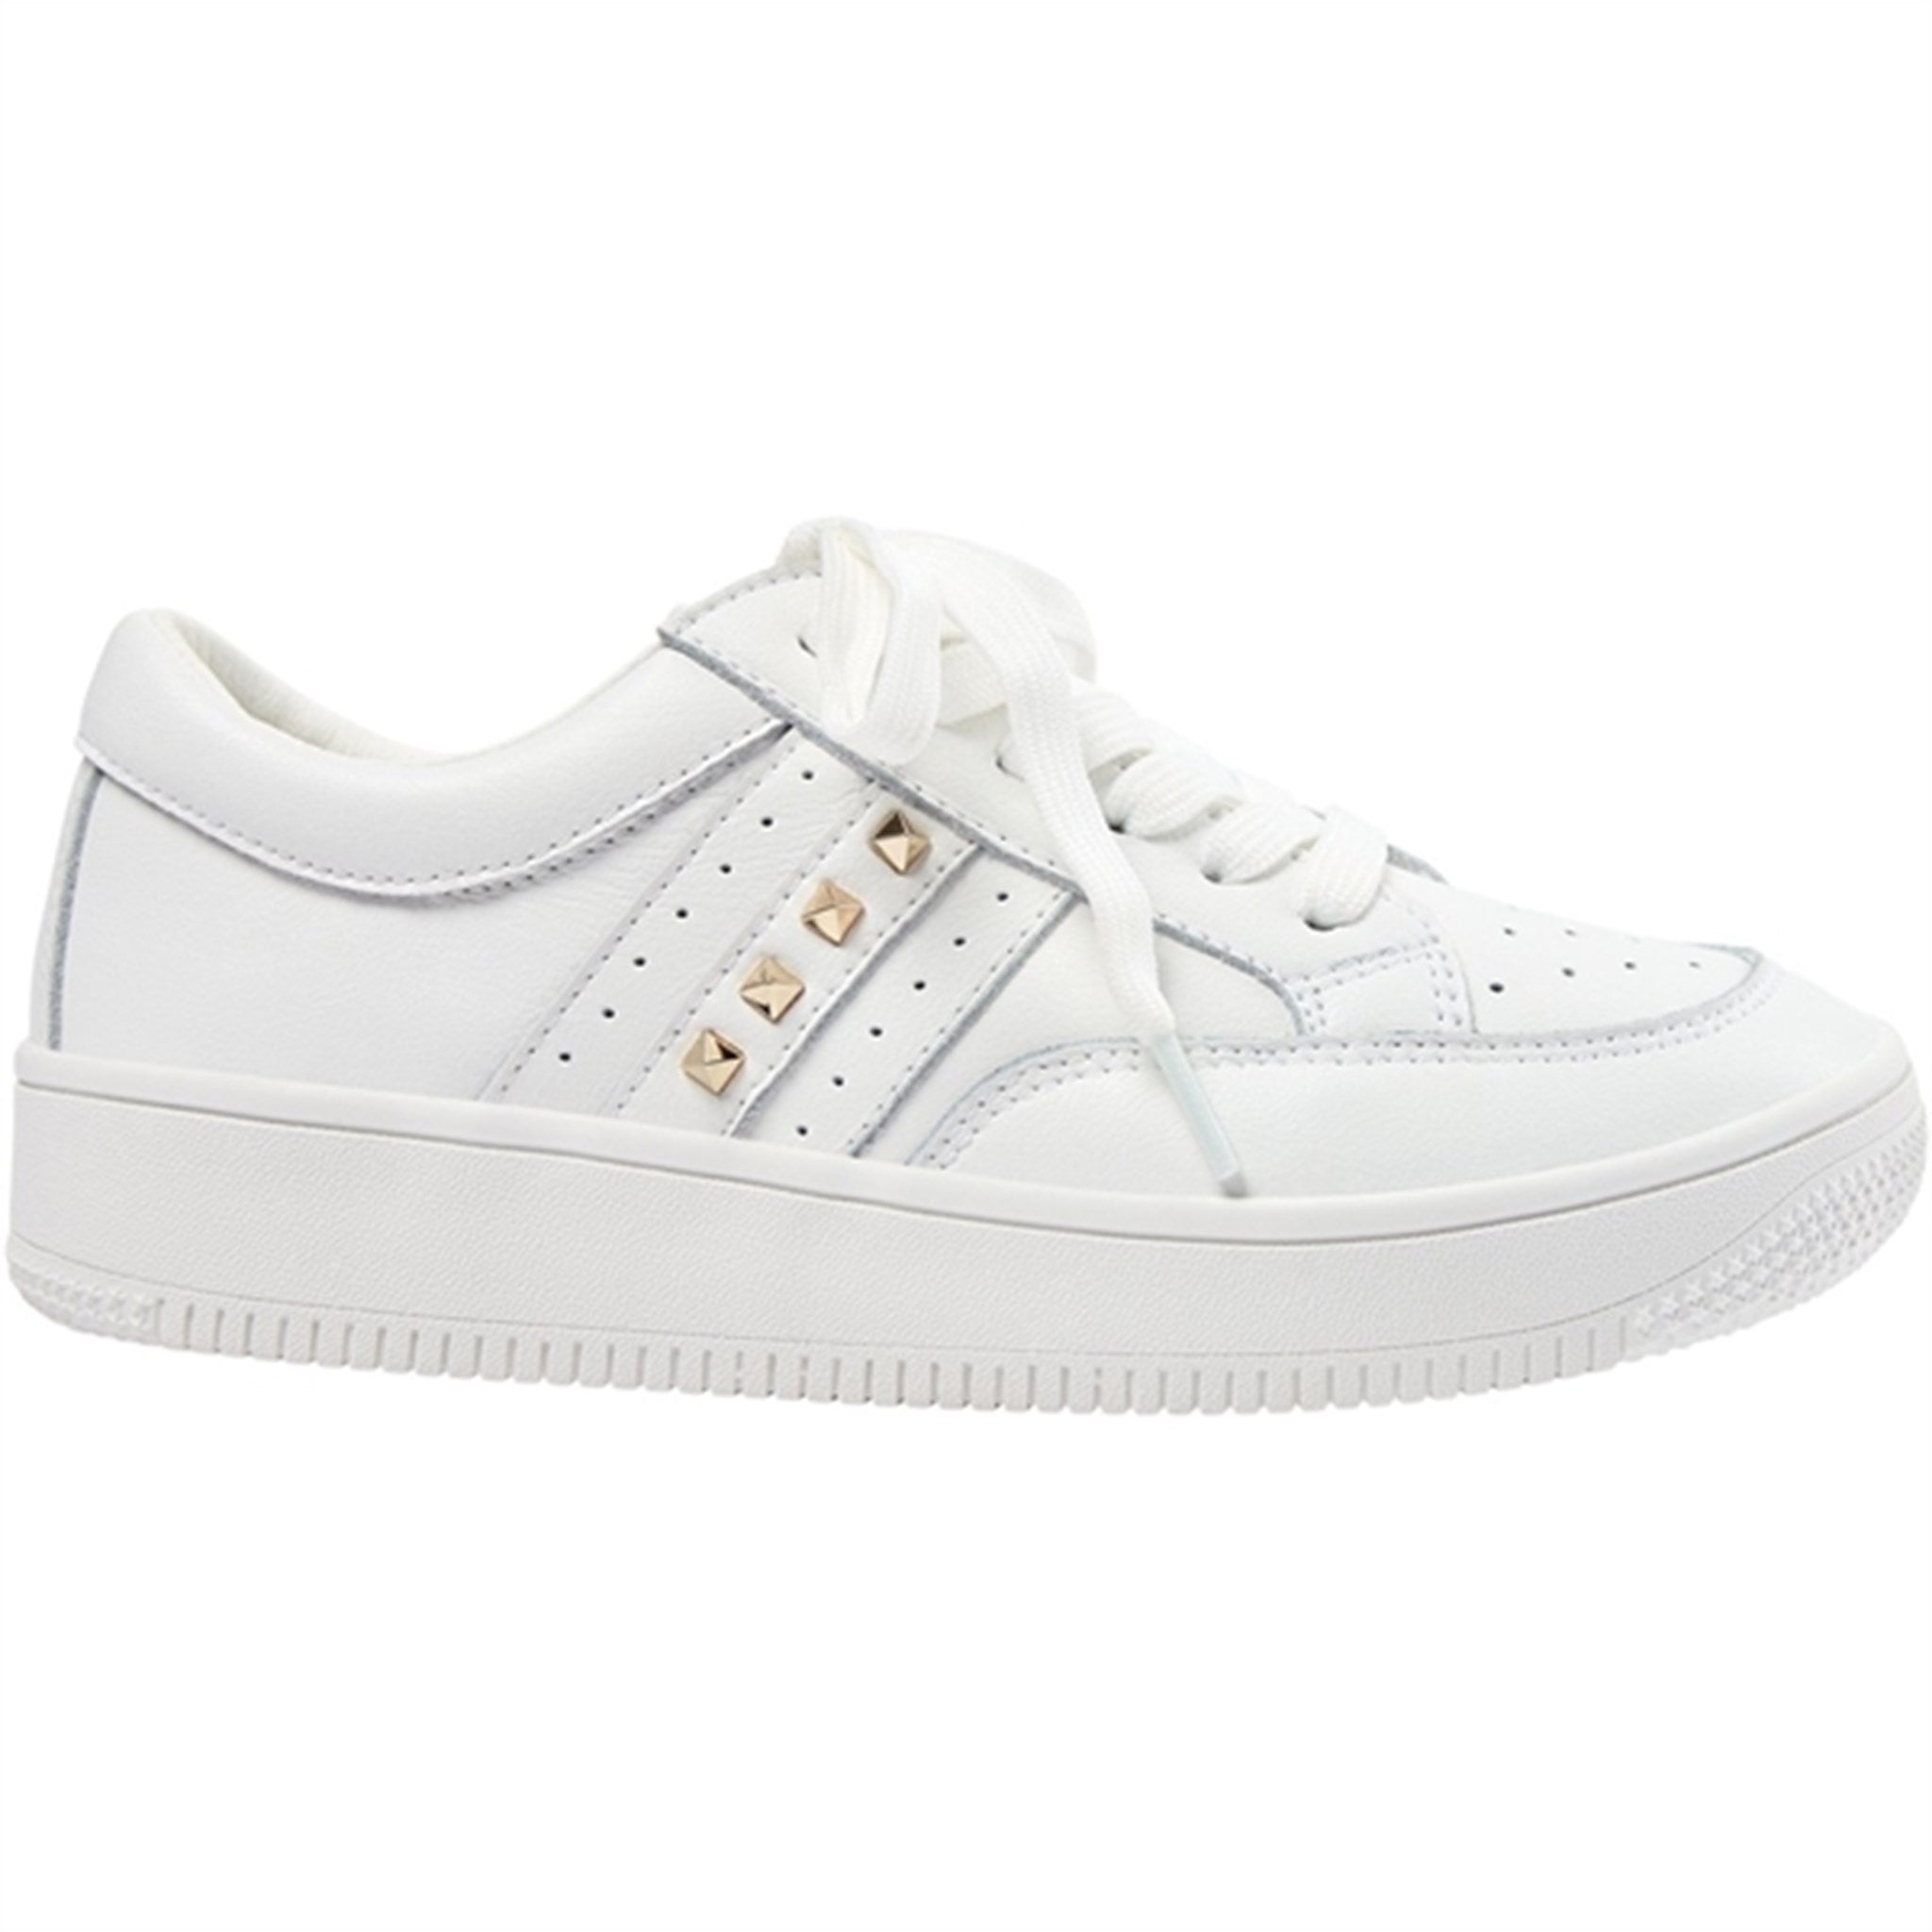 Sofie Schnoor Young Sneakers White